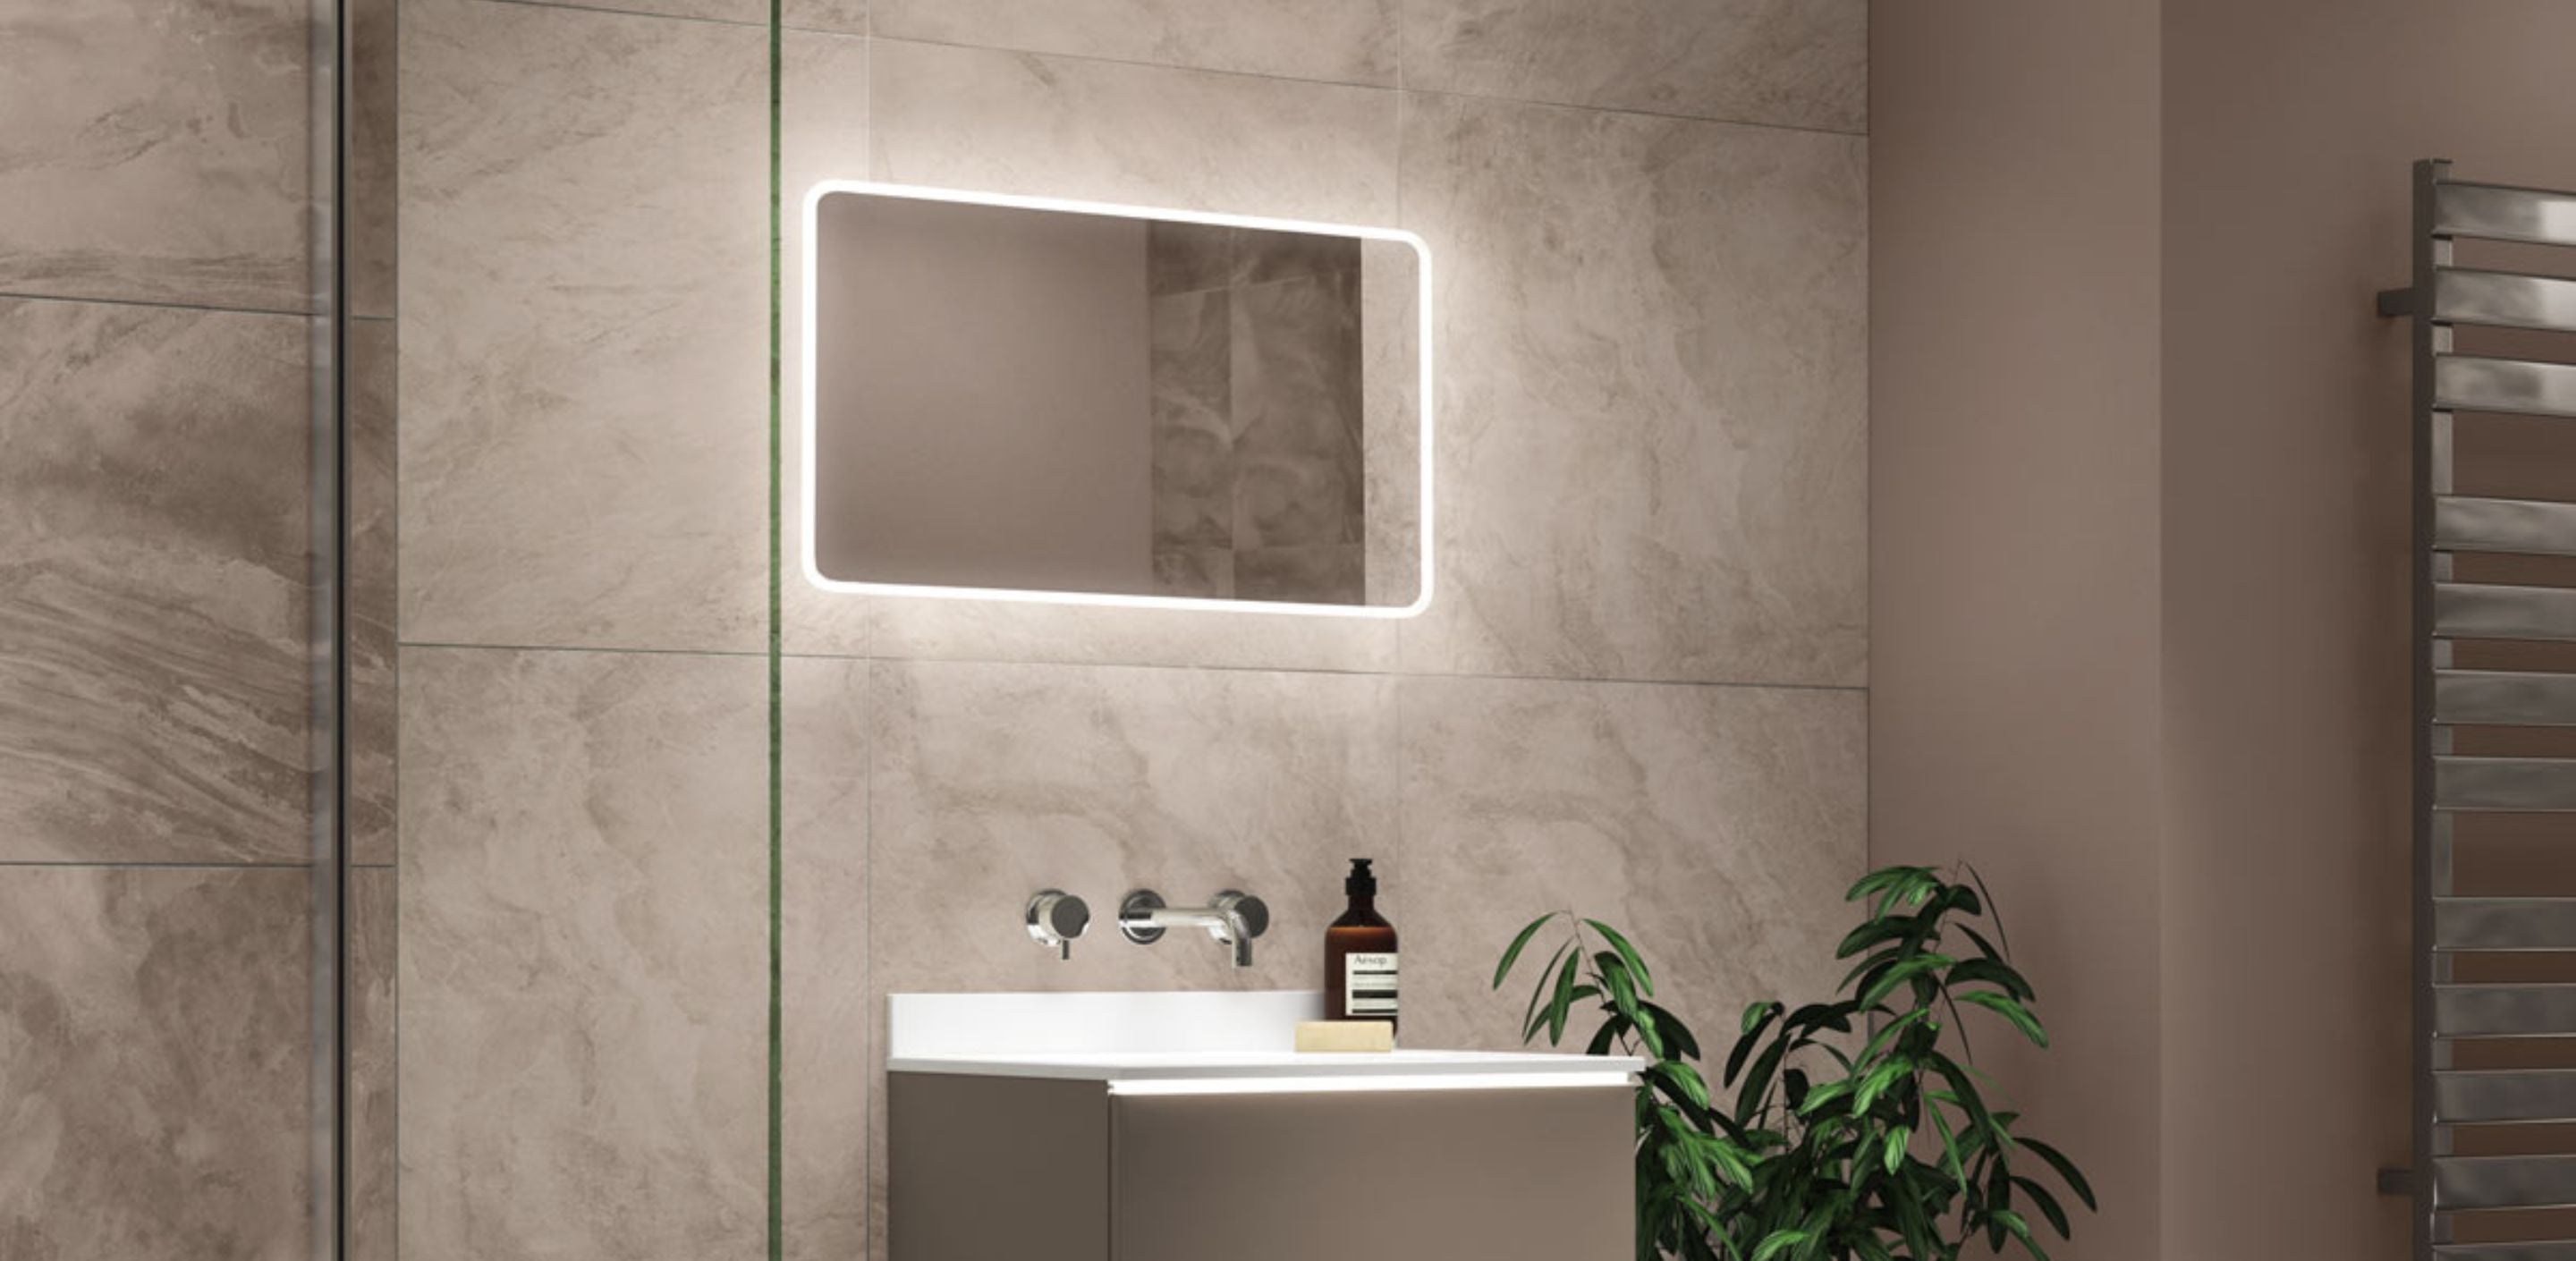 Natural vs Artificial Bathroom Lighting: The Pros and Cons